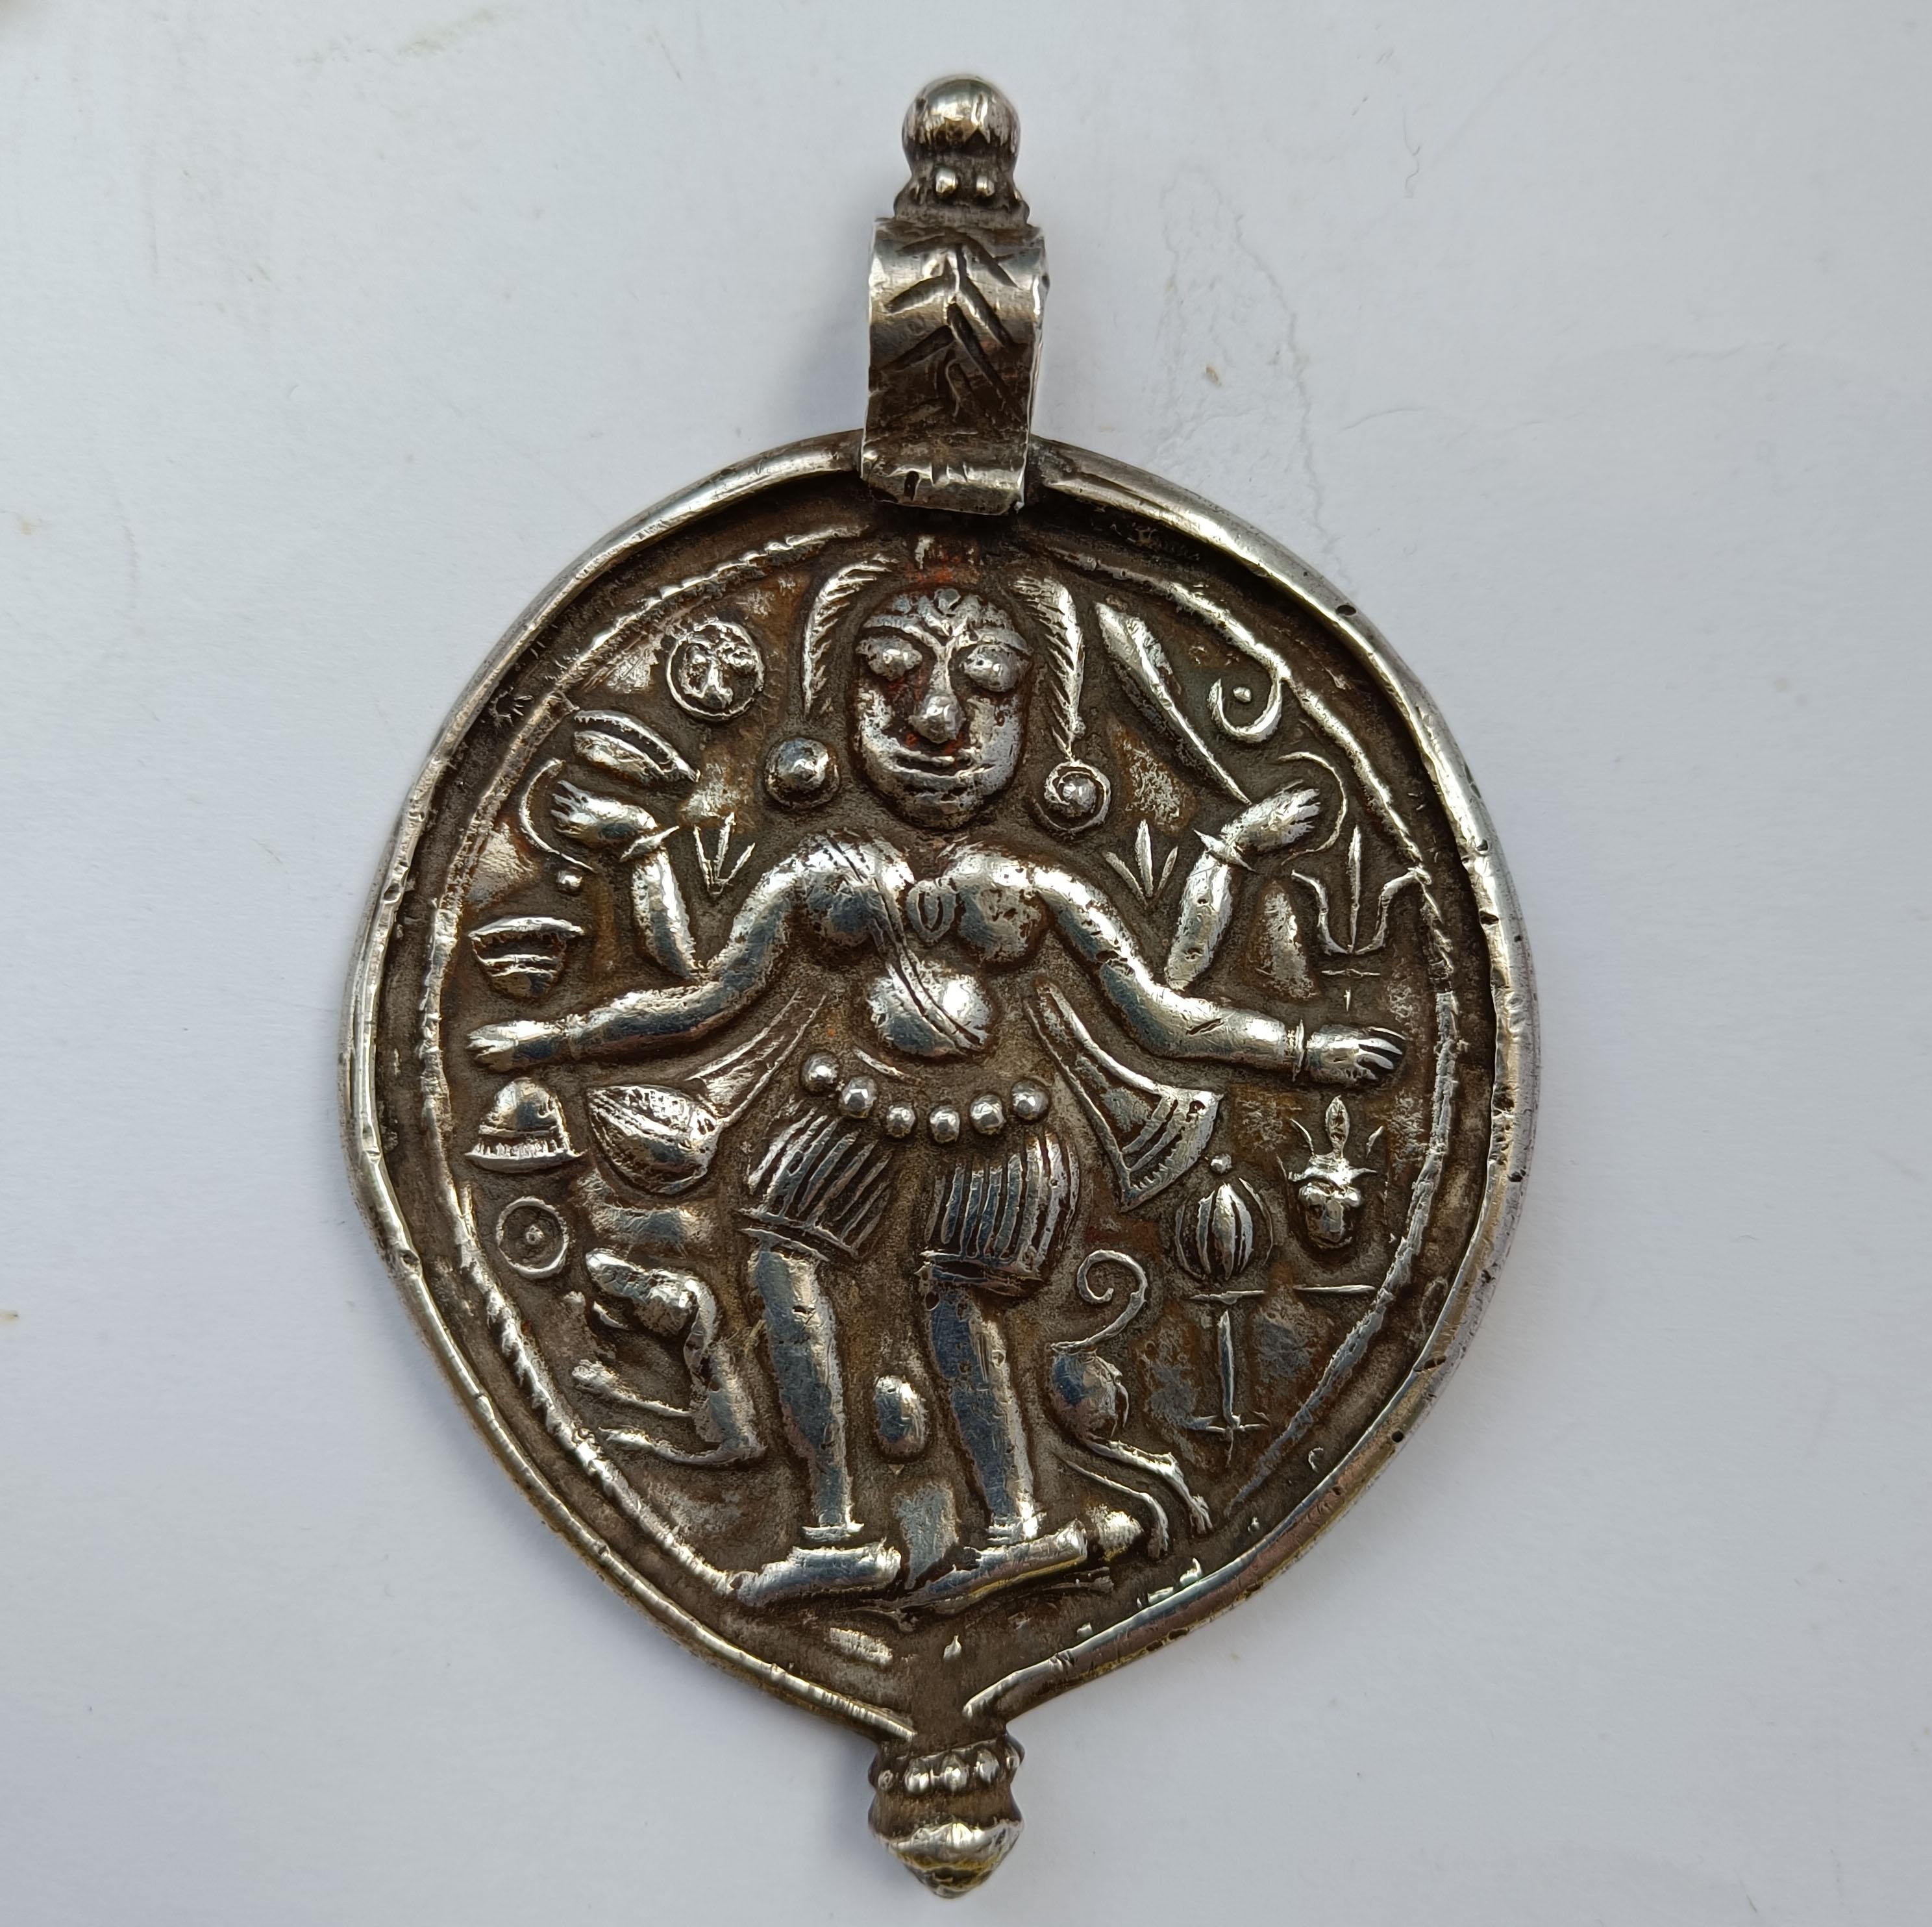 Large rare Antique Indian Hindu Silver Amulet Pendant
Period 19th century
Heavy High grade silver  
Pendant Length 11 x 7.5   cm  weight 65 grams
Condition: Fine.

 
 
